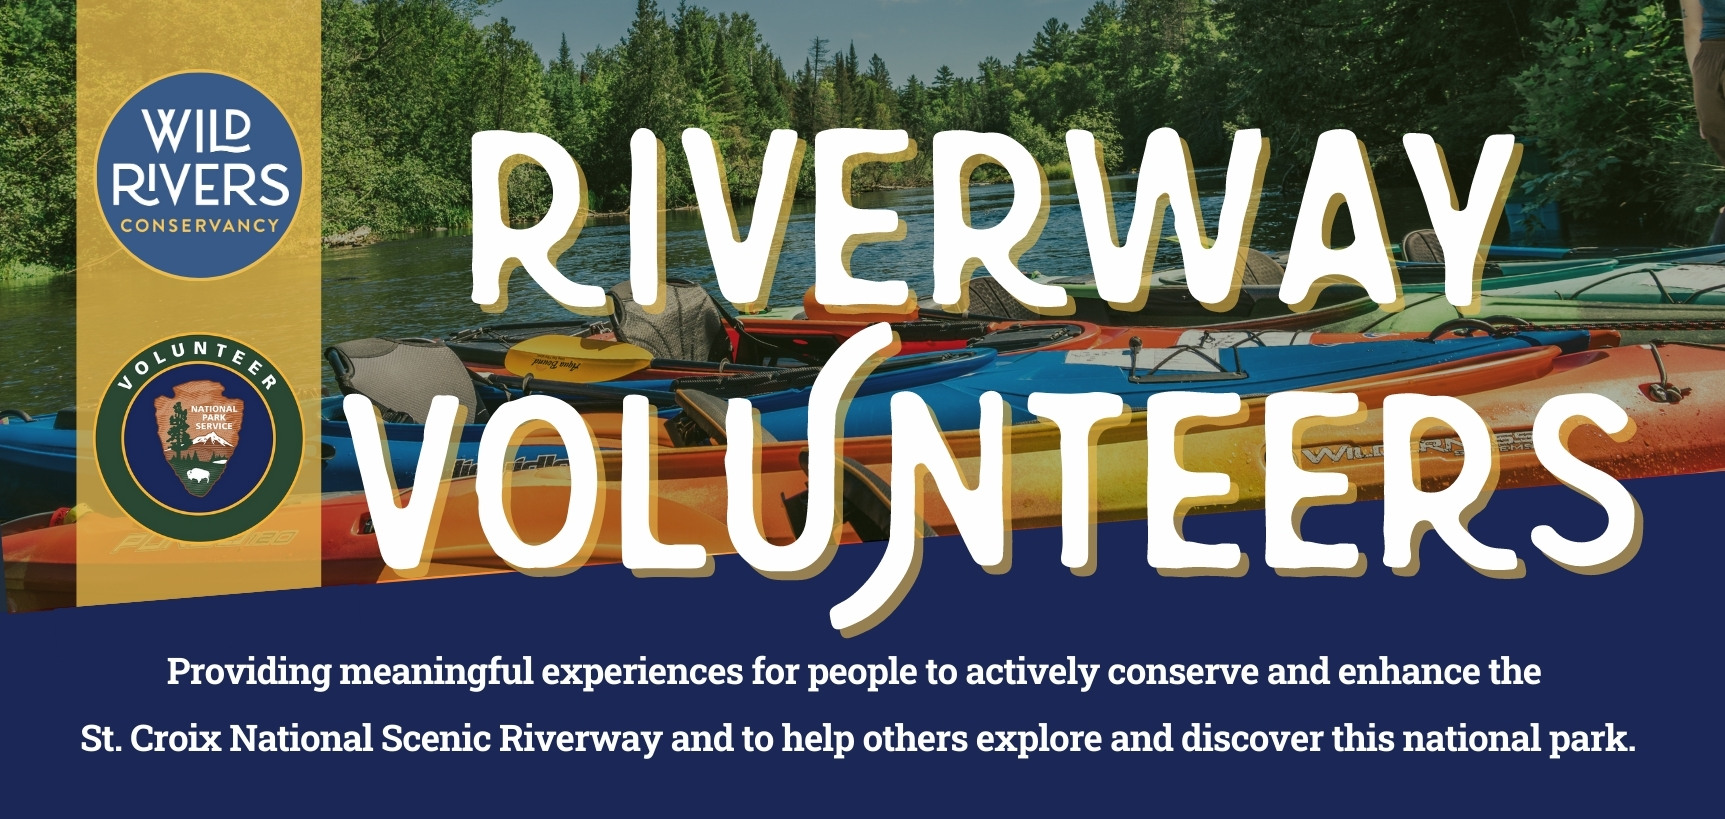 Background of colorful kayaks on river with trees in back.  "RIVERWAY VOLUNTEERS" in white over the background.  Wild Rivers Conservancy logo and VIP logo on yellow band down the left.  Mission statement at bottom.